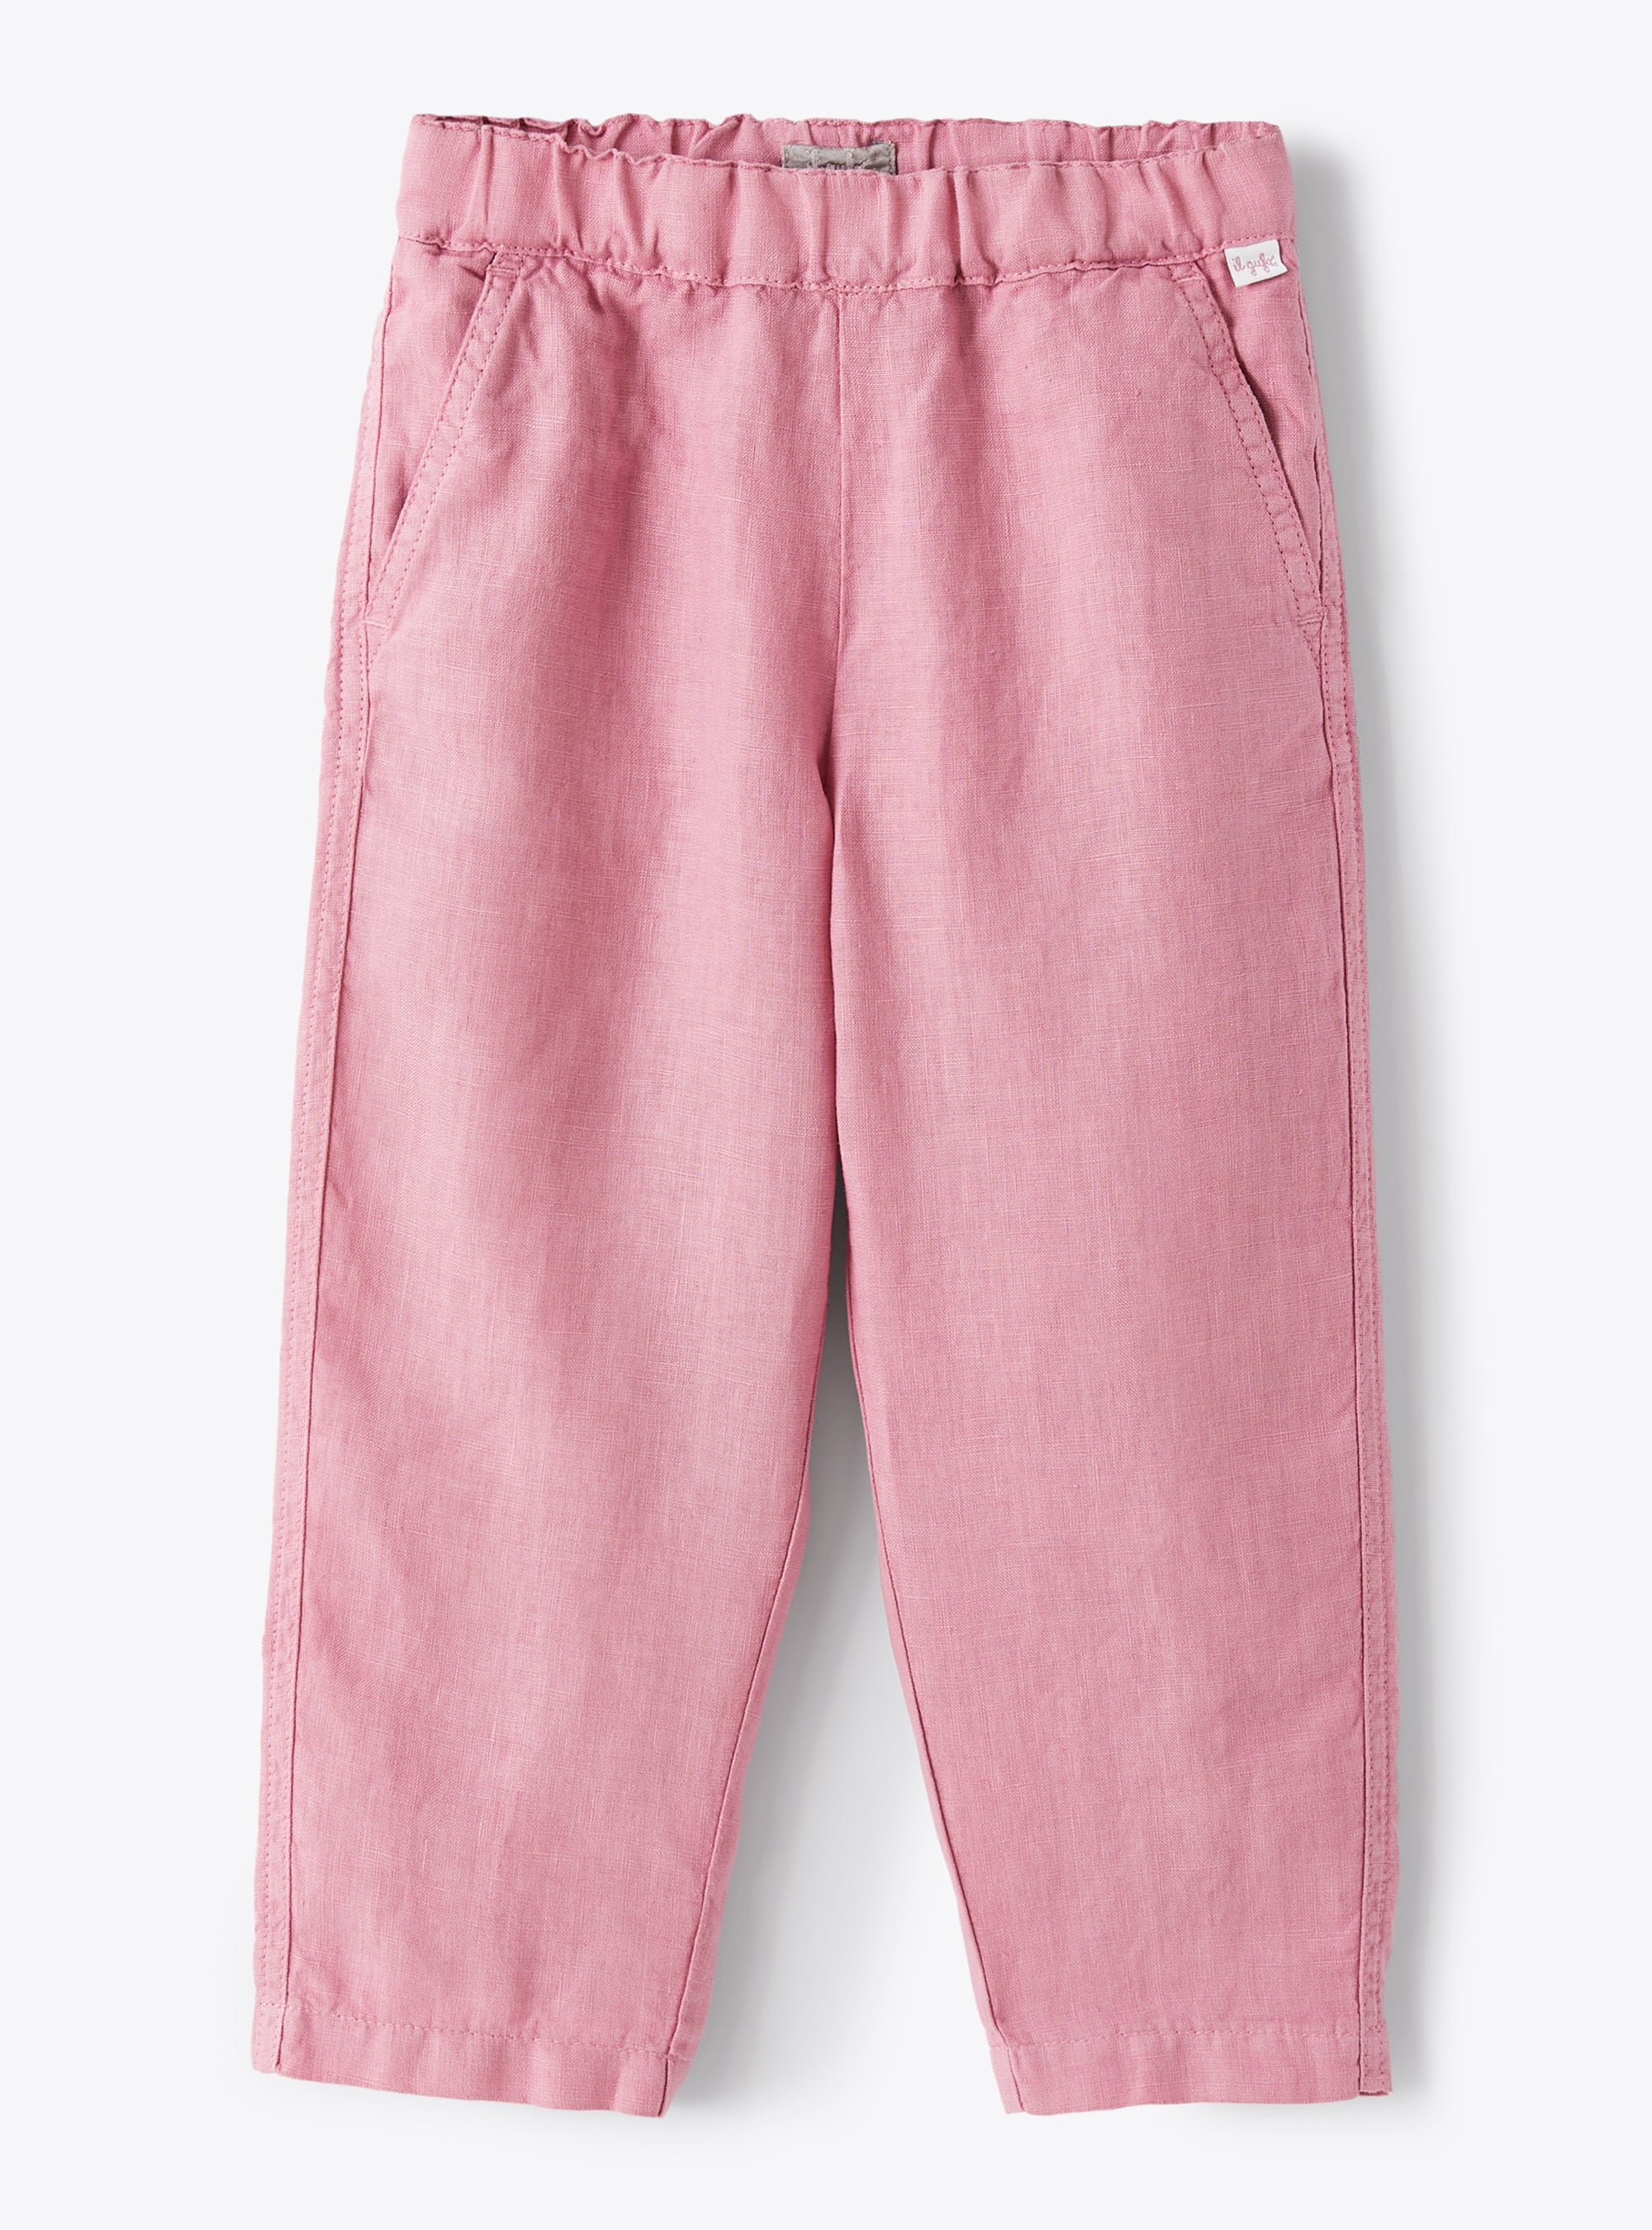 Long drawstring trousers in pink linen - Pink | Il Gufo